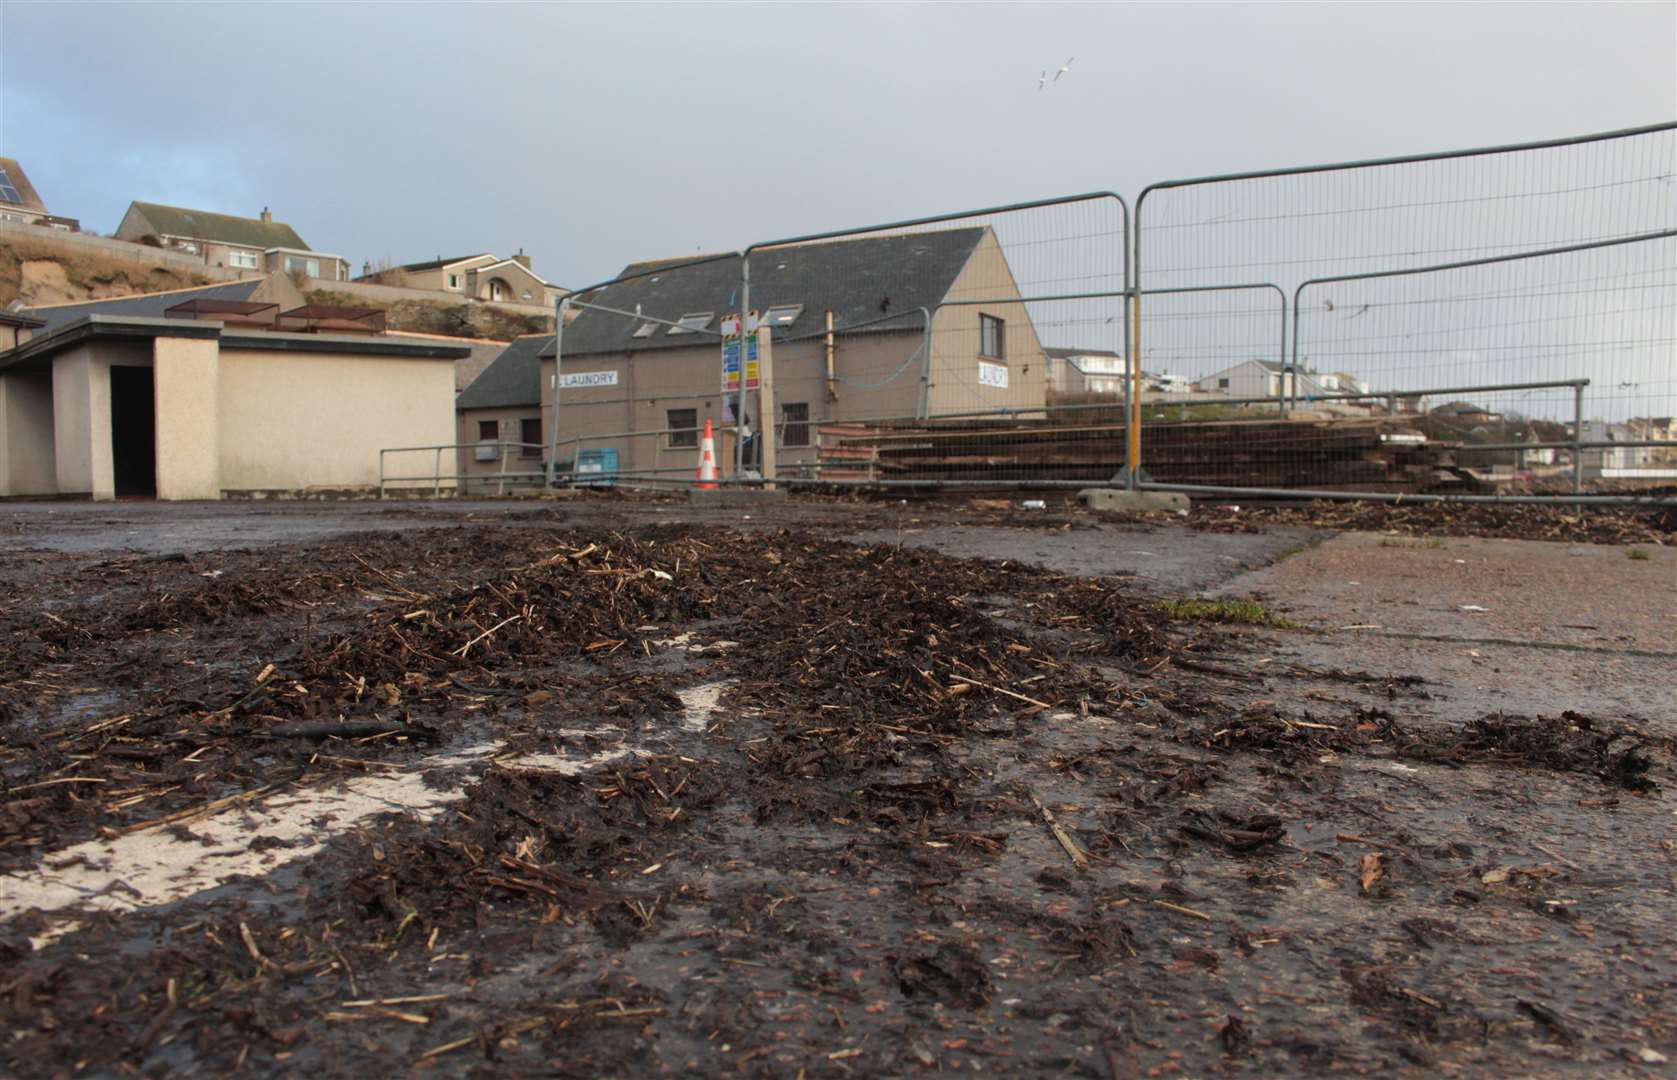 Seaweed scattered across the surface of the car park at the Camps.